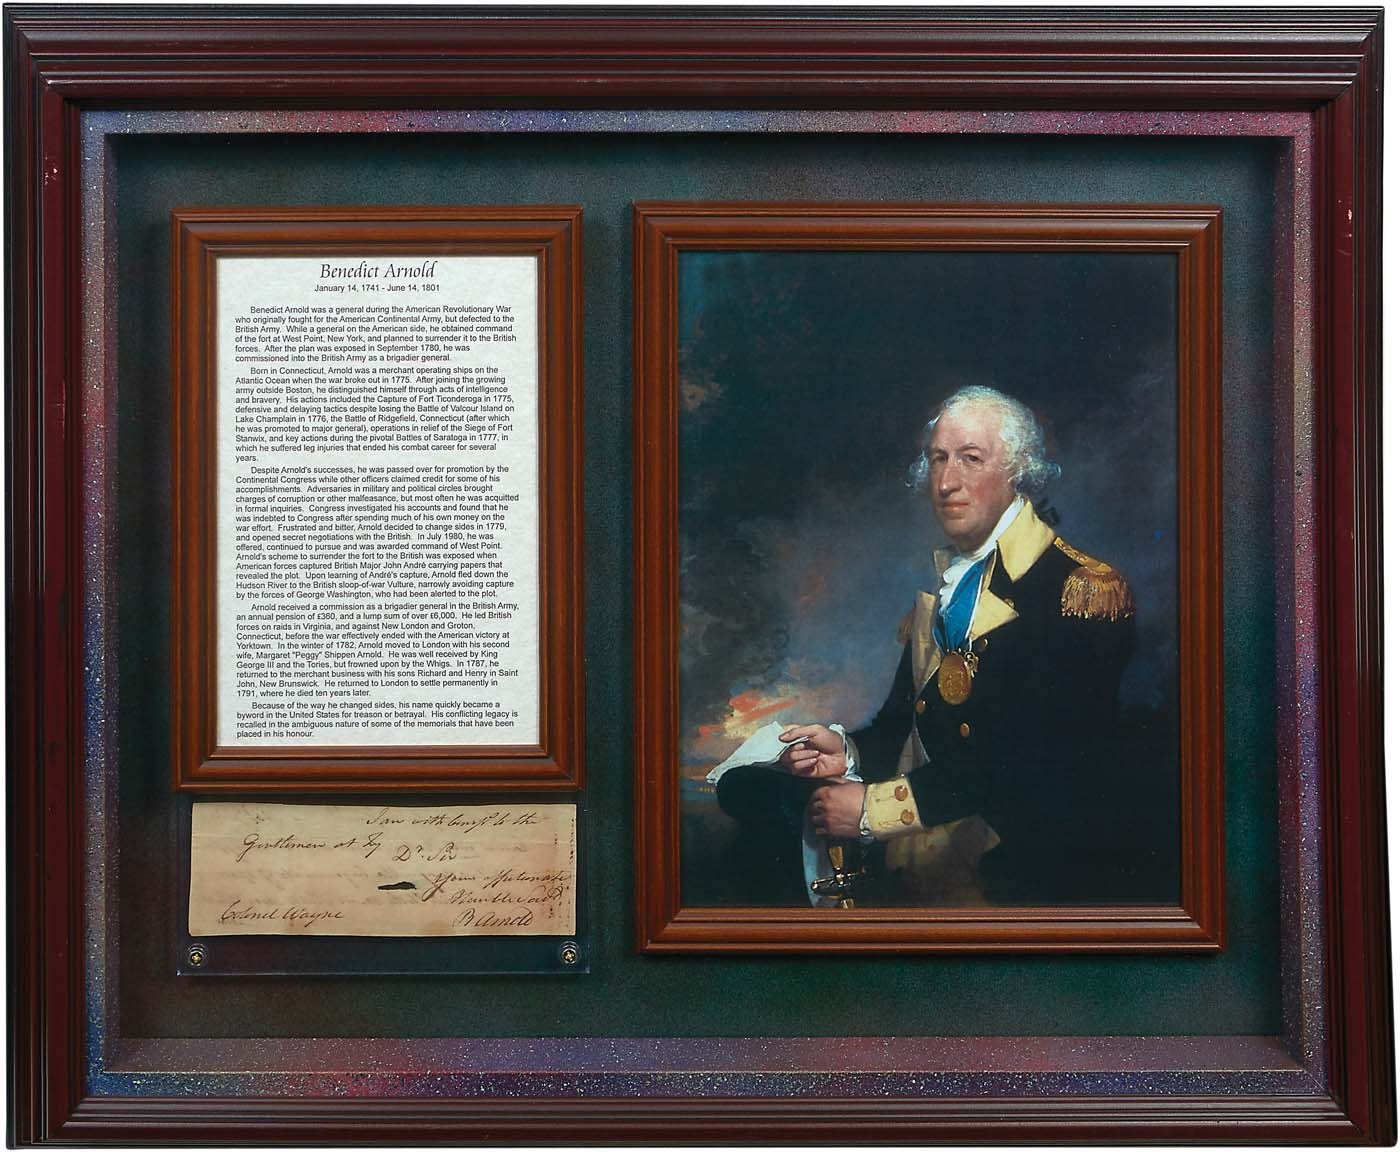 Rock And Pop Culture - Benedict Arnold Signed Letter Display with "Boston" Content (JSA)